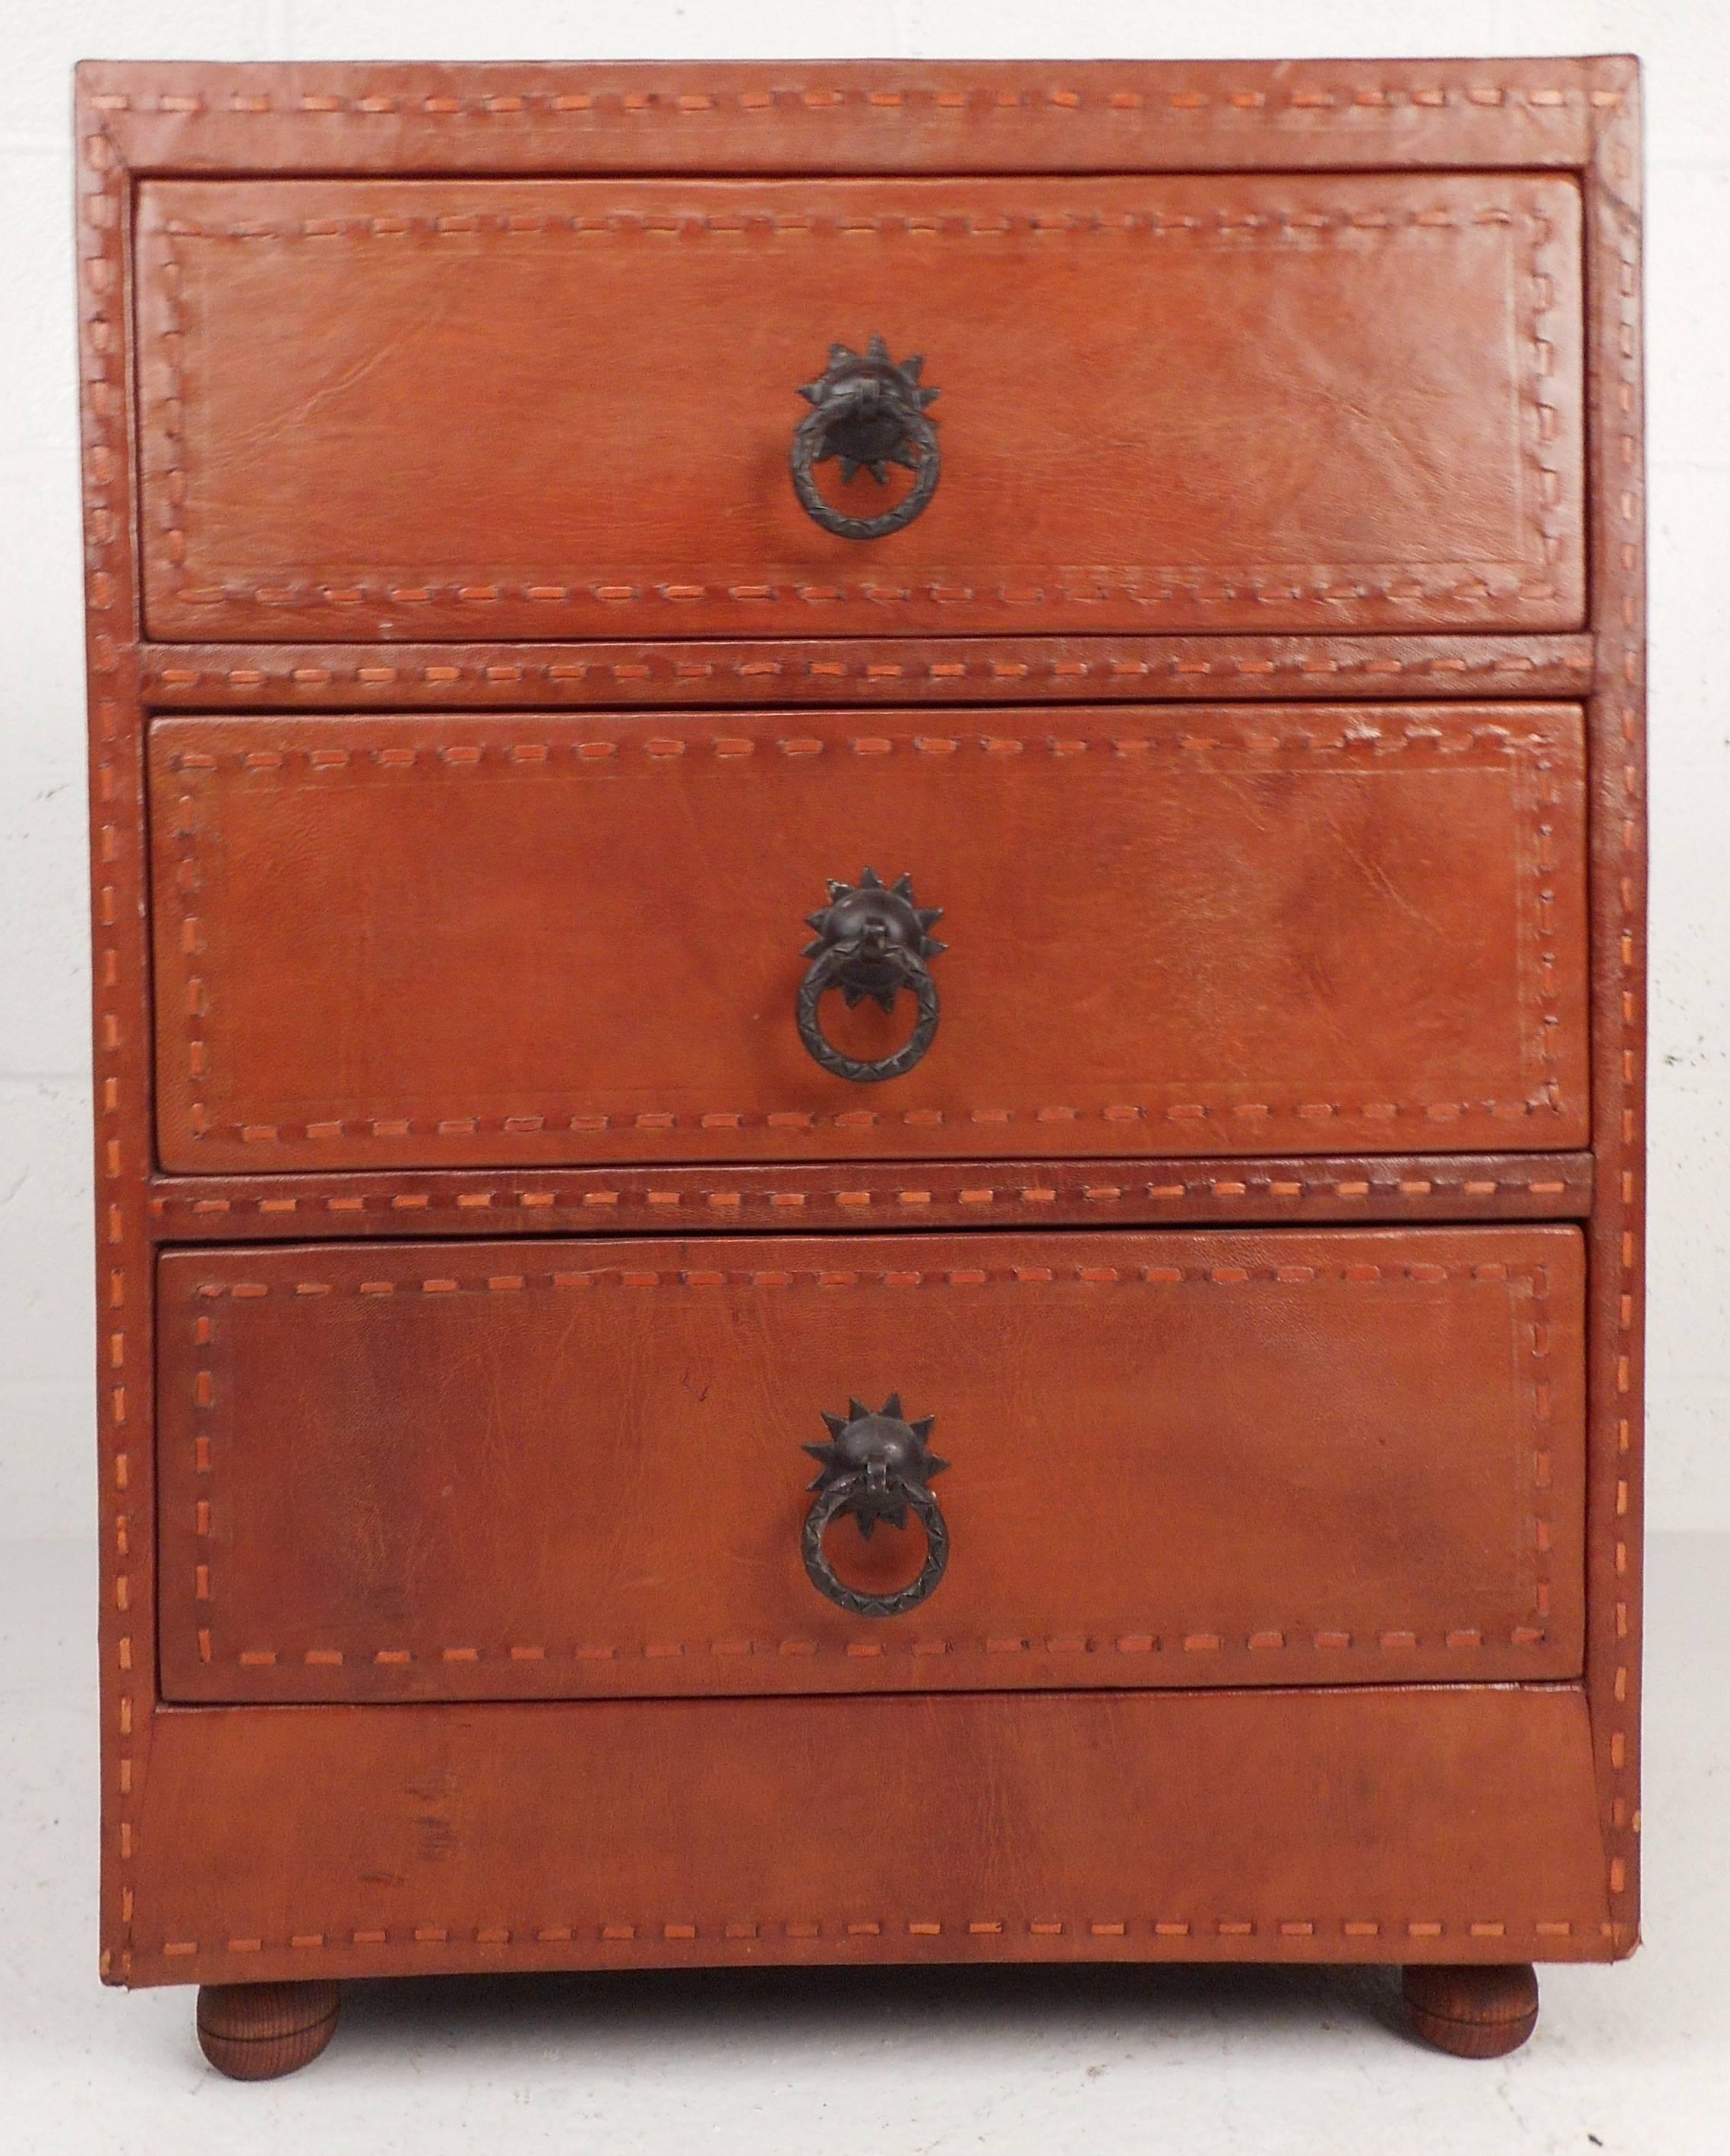 Handsome European style three-drawer chest or nightstand features Spanish cordovan leather and unique metal pulls. The beautiful pyrrole orange leather features unique stitched trim with charcoal black interior, makes a great nightstand or lamp